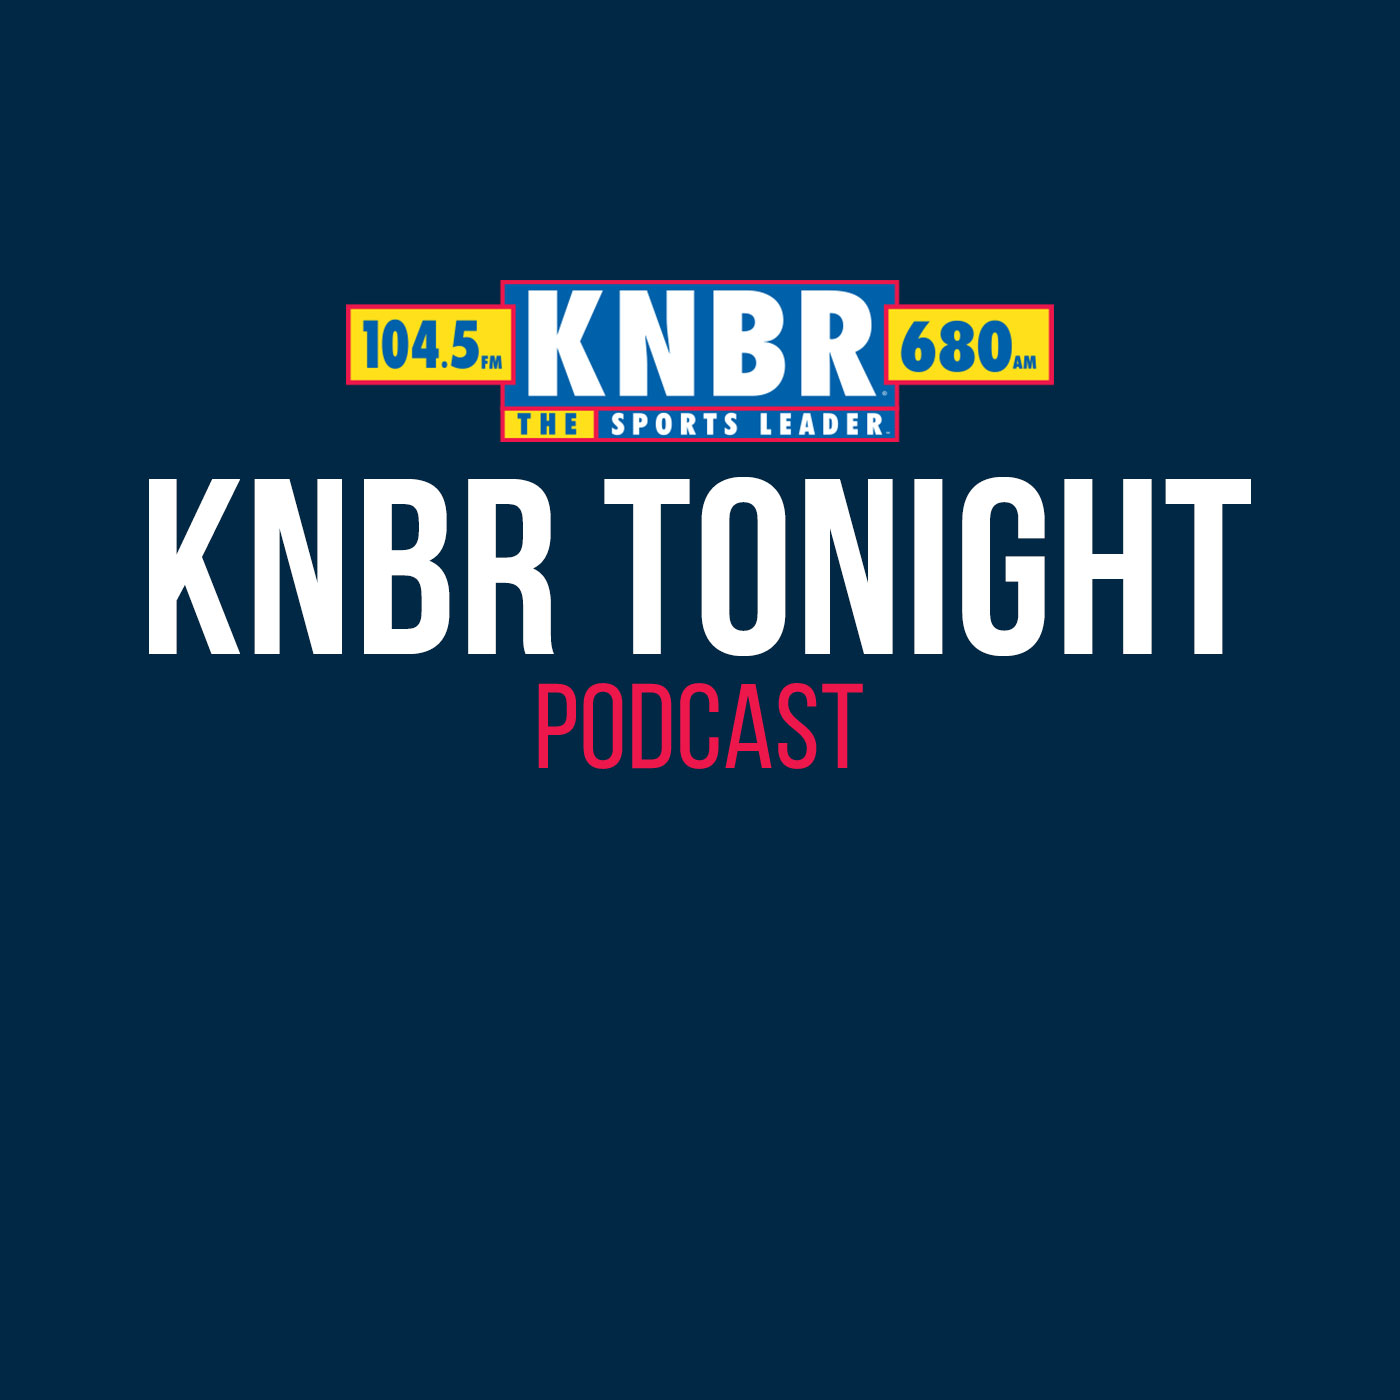 8-5 Kerry Crowley joins KNBR Tonight with Dieter after the Giants 5-4 comeback win vs the D-Backs